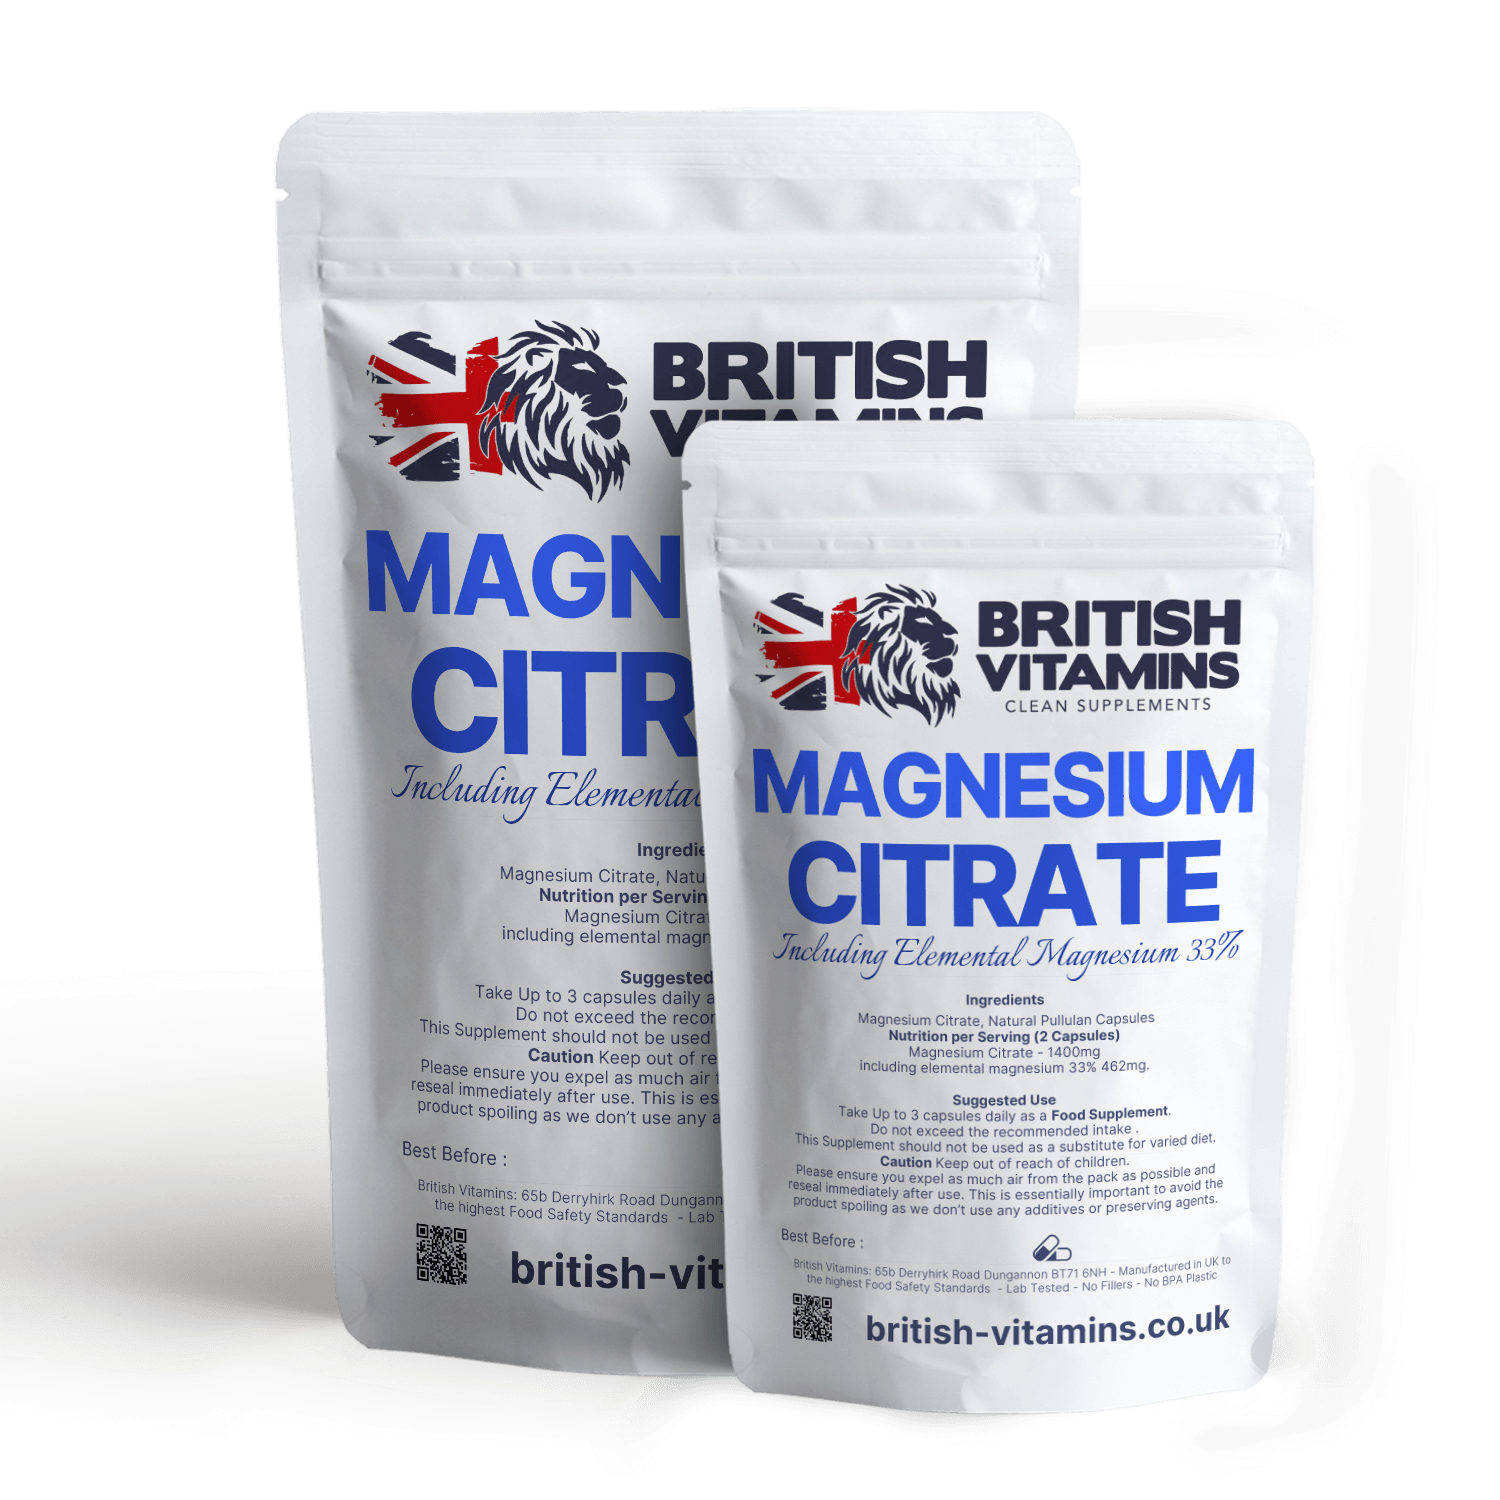 Magnesium Citrate Genuine Capsules 700mg - Additive Free Health & Beauty:Vitamins & Lifestyle Supplements:Vitamins & Minerals British Vitamins 120 Capsules (2 Months Supply )  